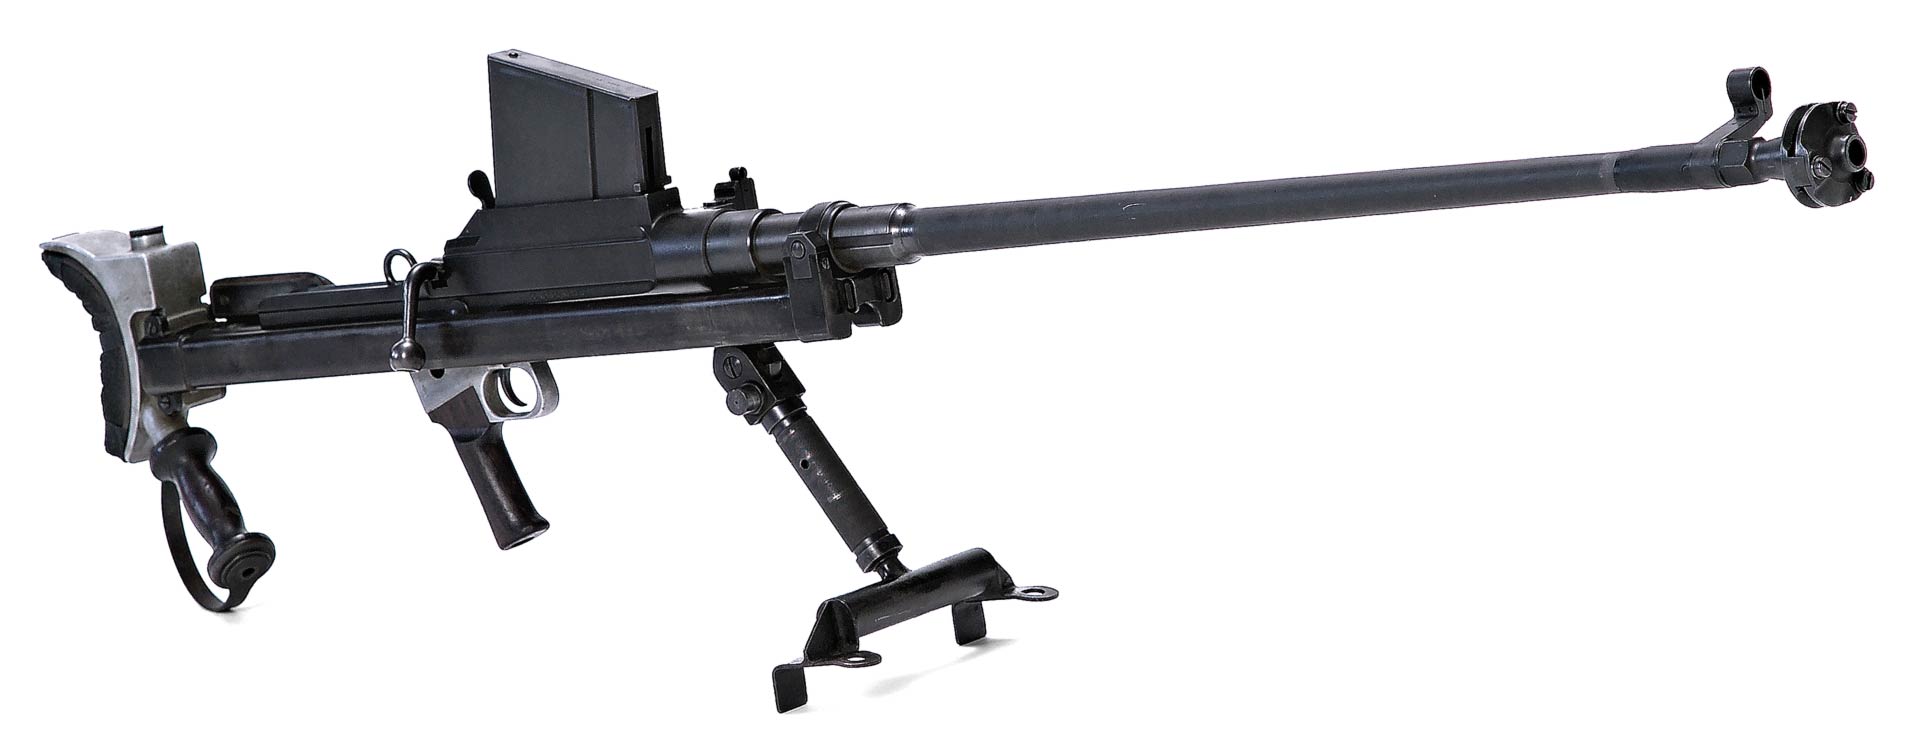 At 36 lbs., the Boys could hardly be called light, but it weighed substantially less than a Browning M2 .50 BMG, which weighed 128 lbs. with its tripod.